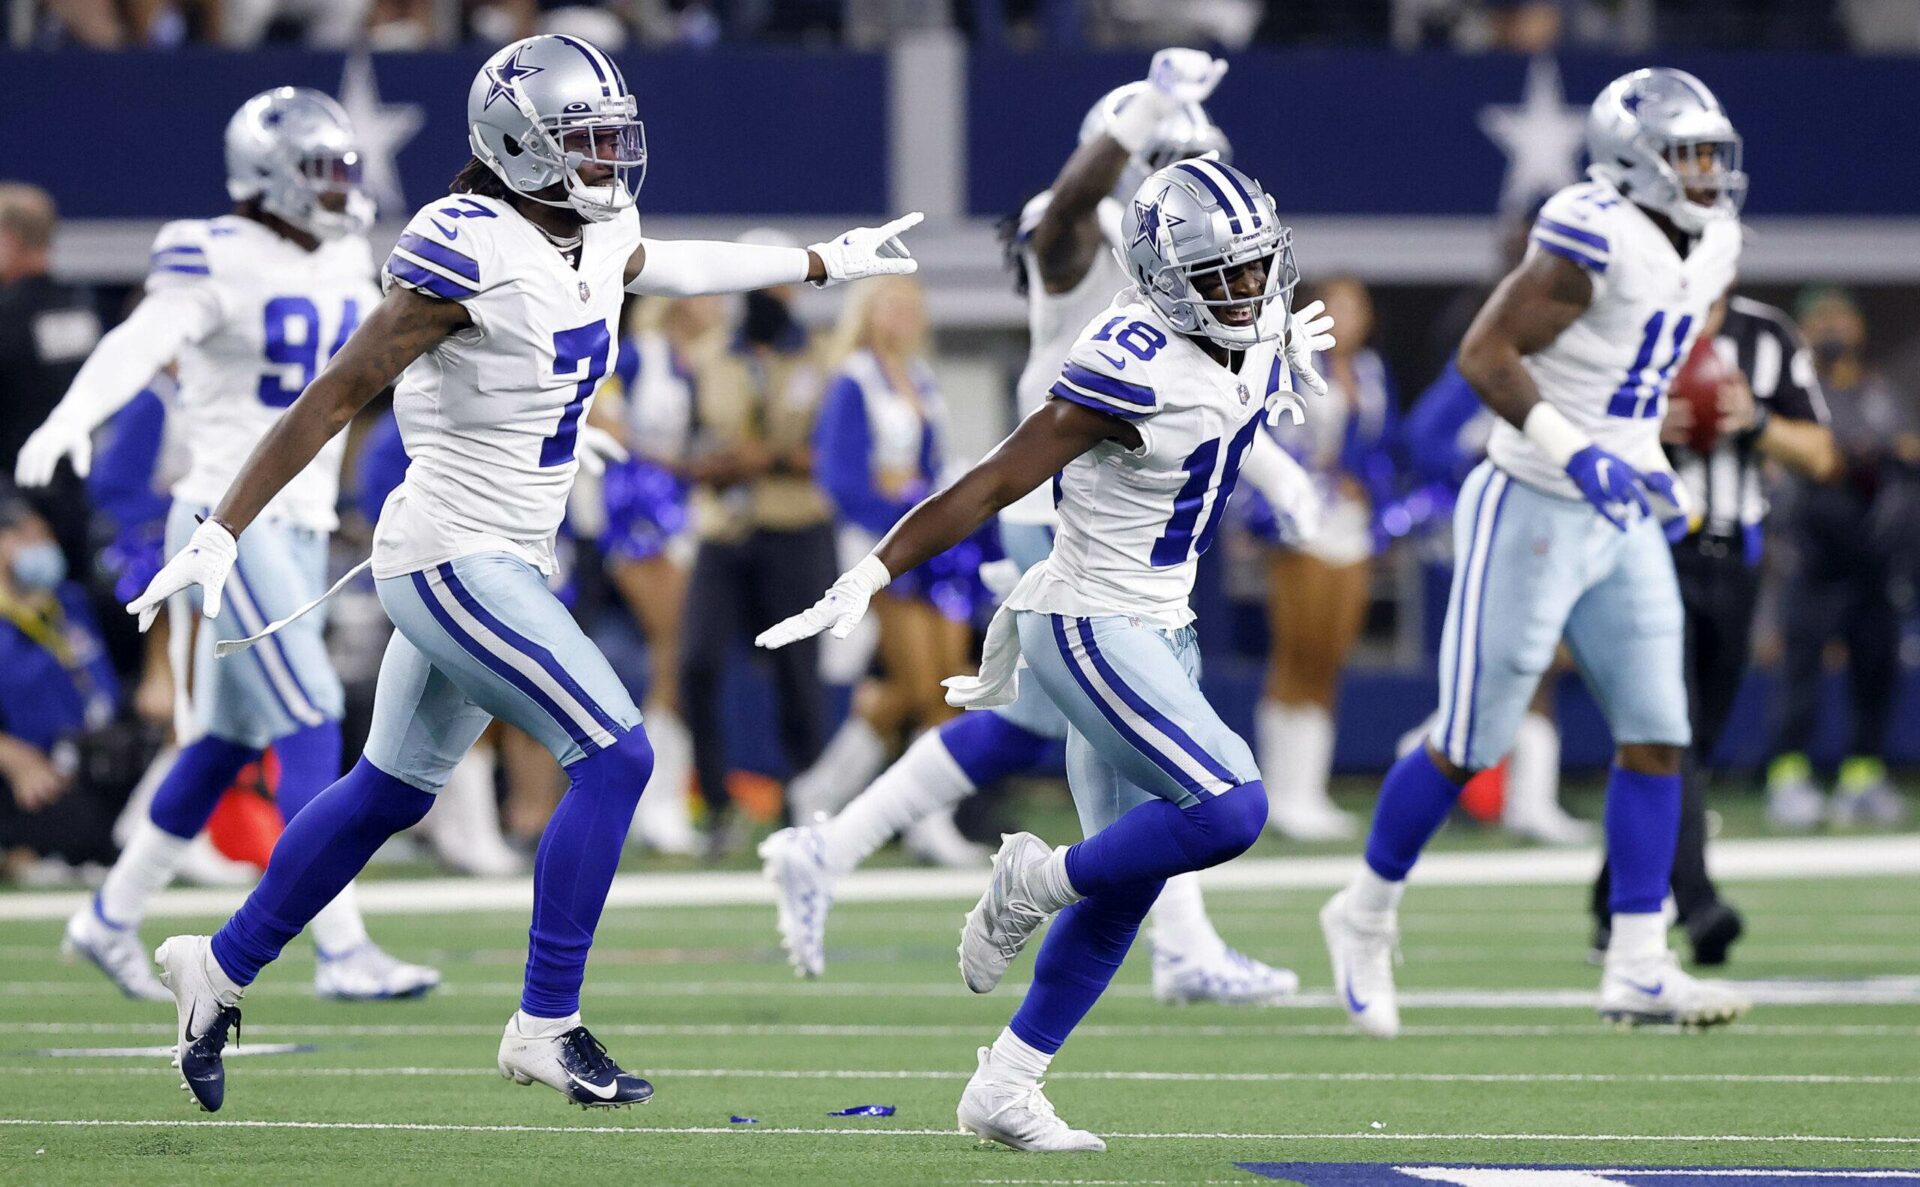 Fact or fiction: The Dallas Cowboys are a legit NFC contender